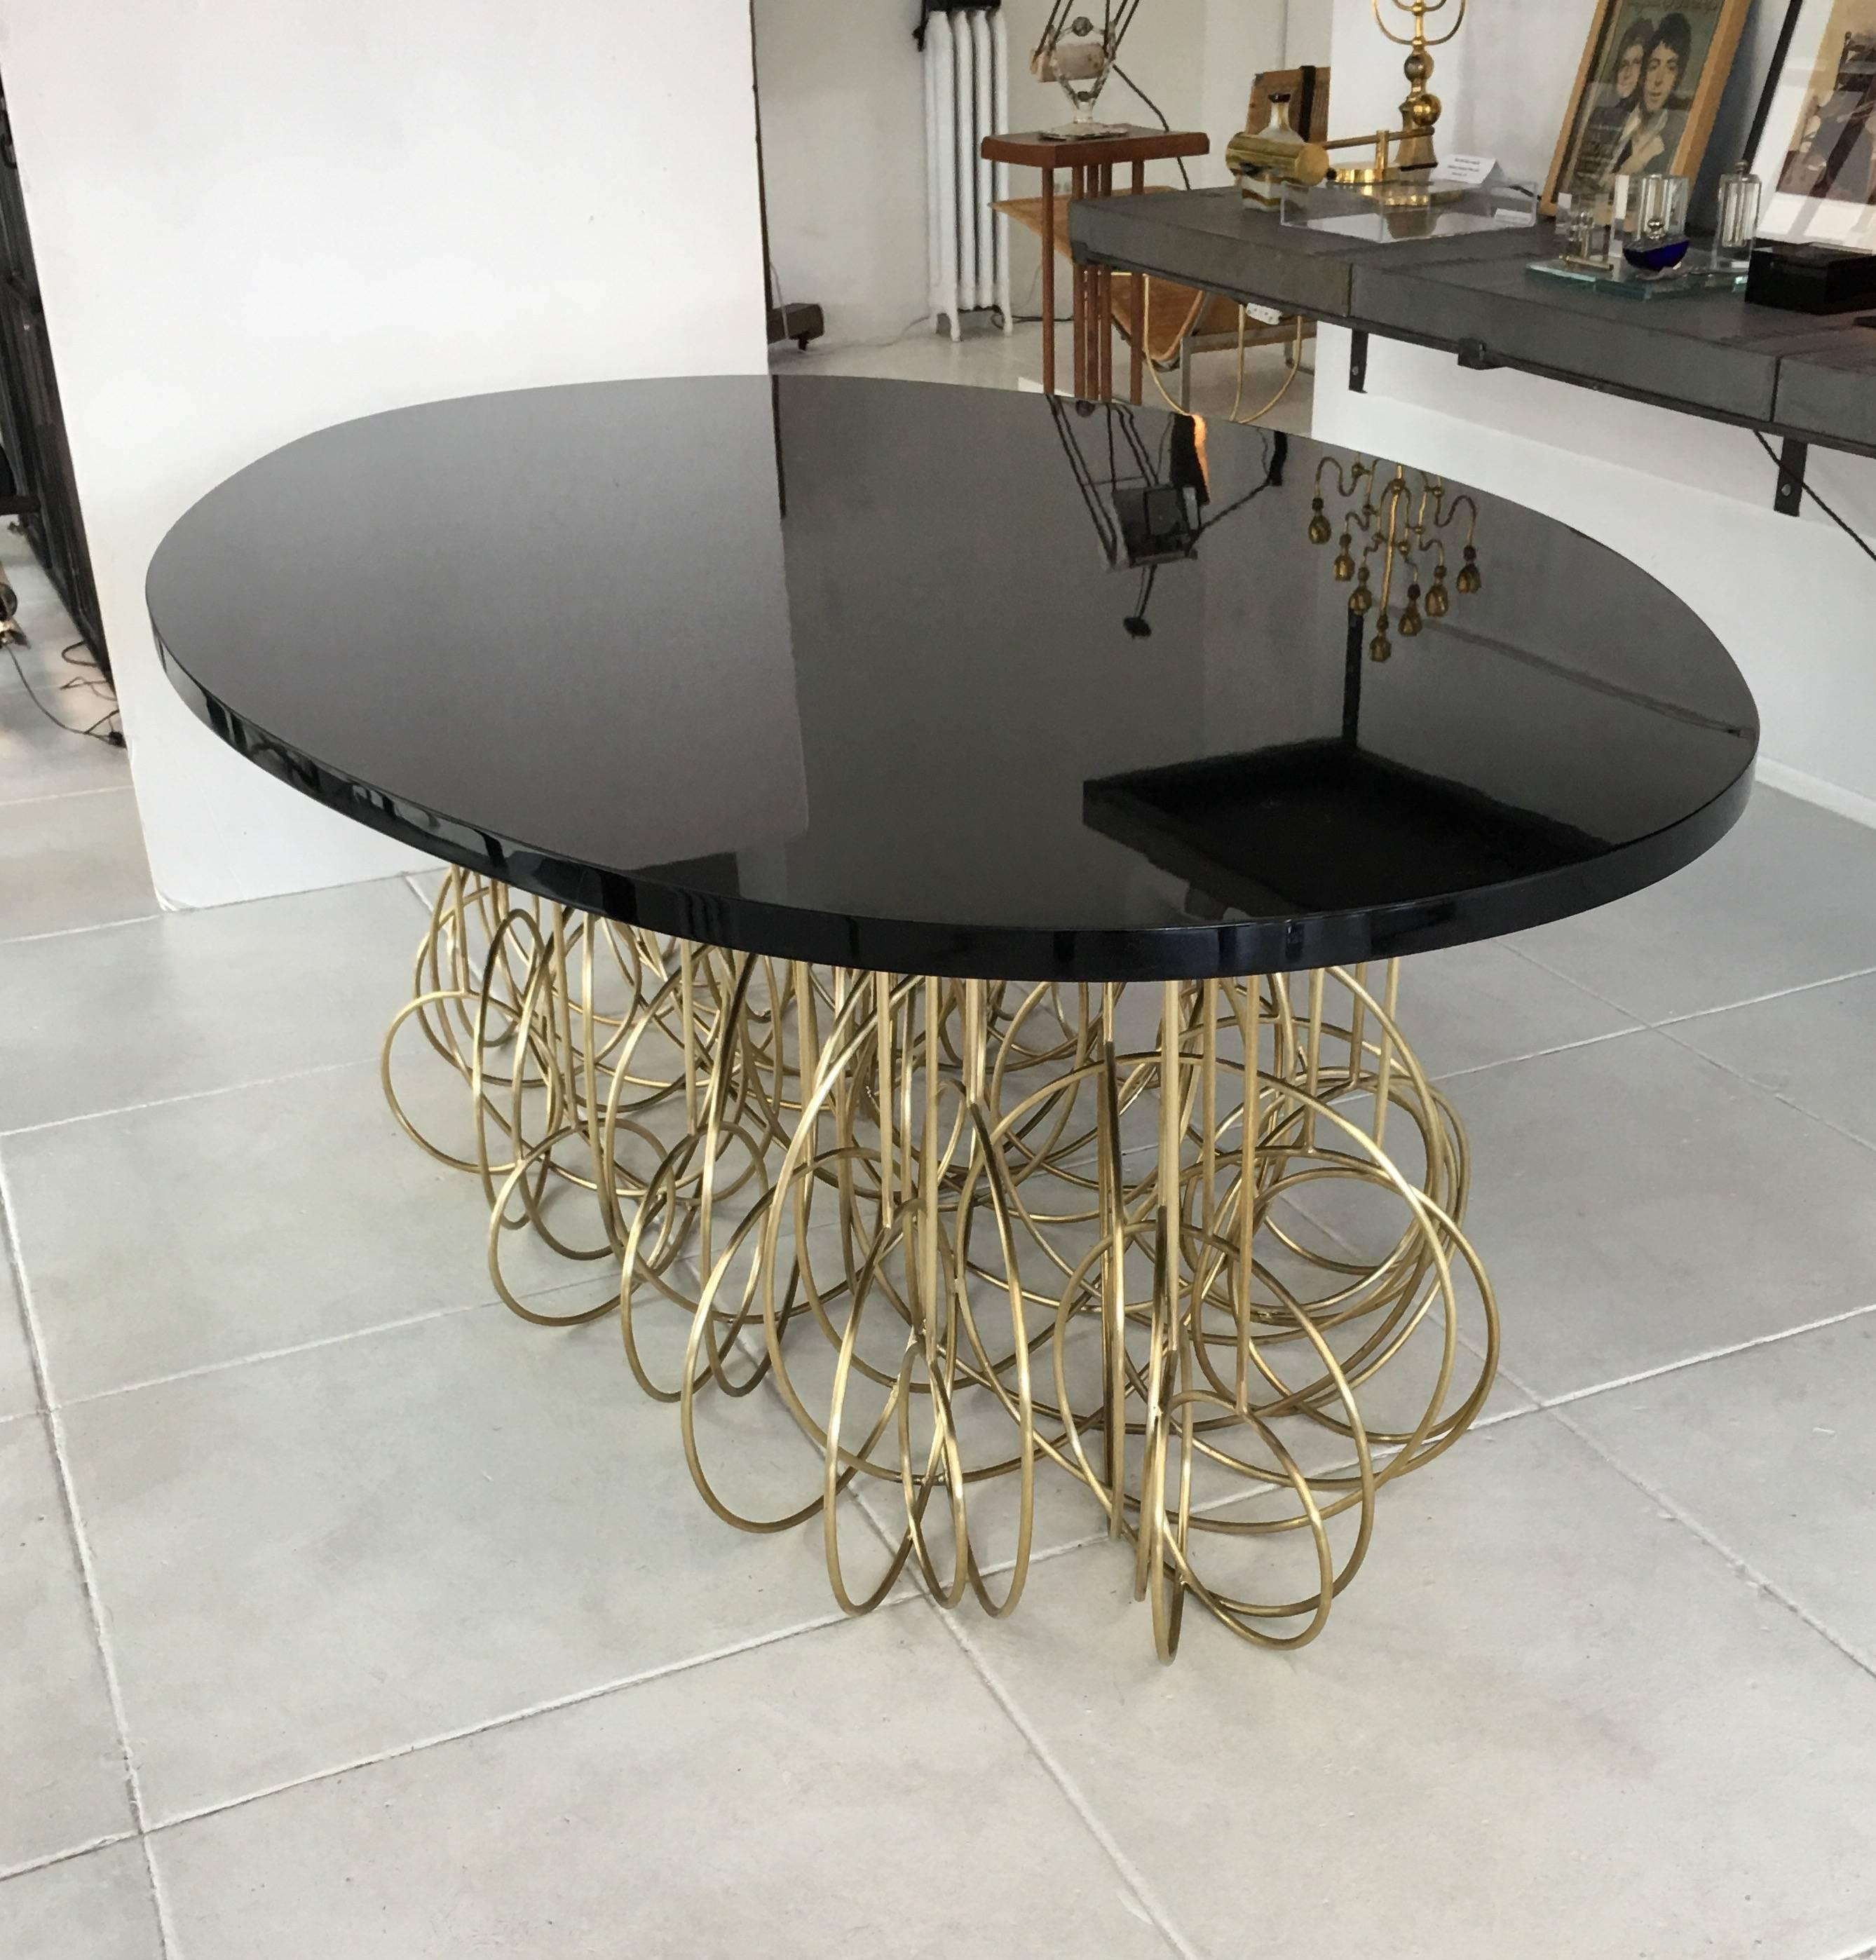 Most unique and extravagant French Dining or Center Oval Table. Combination of brass and 1.5 inch thick black lacquered wood top.